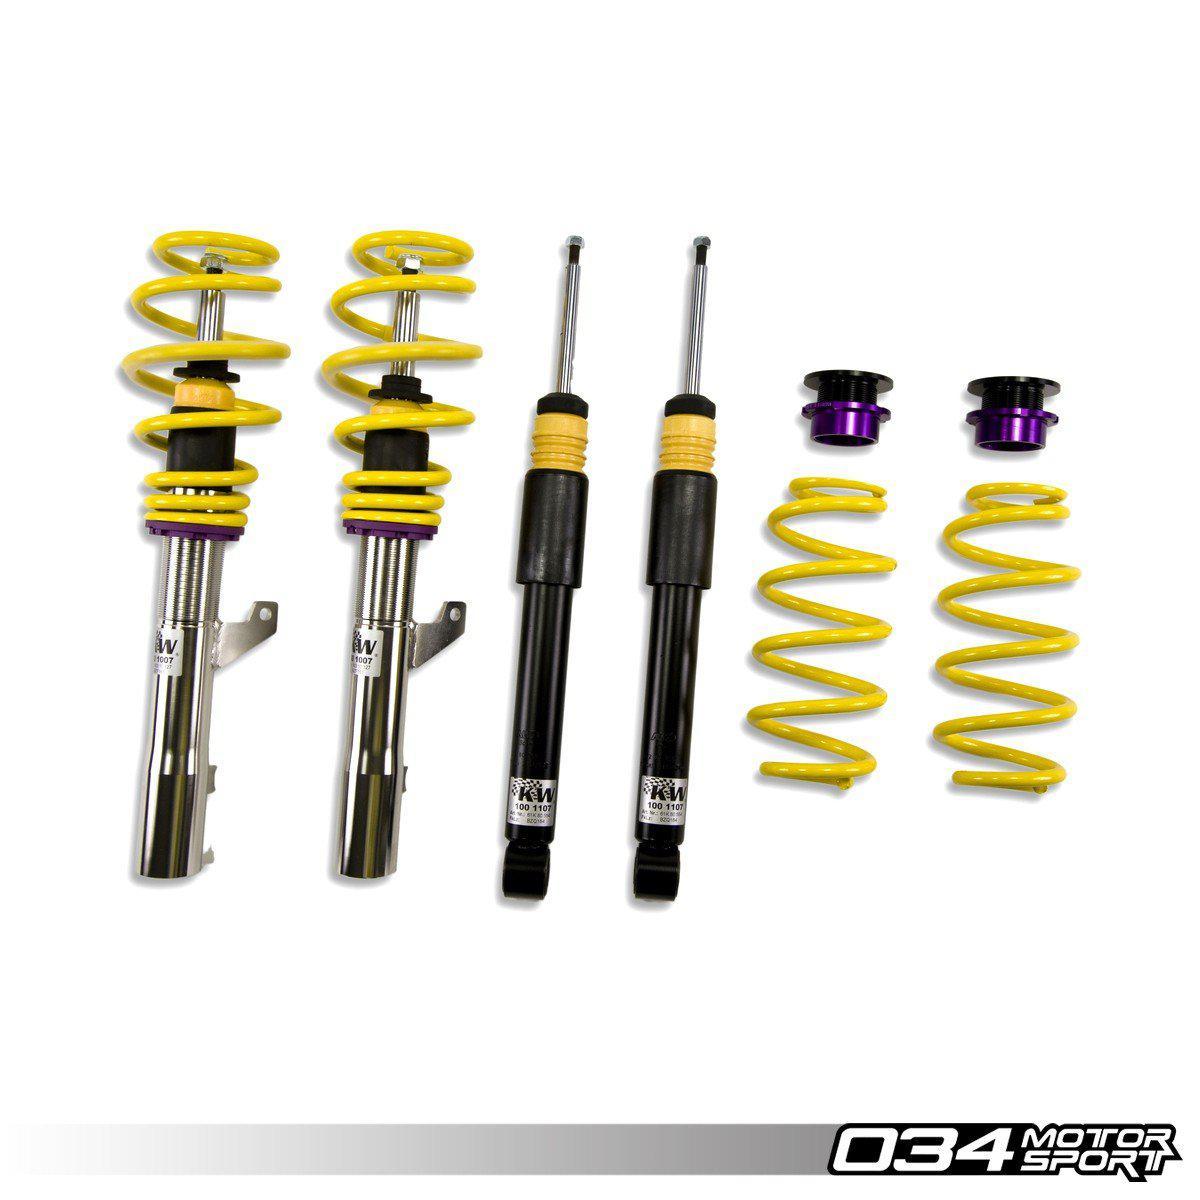 KW Variant 1 Coilover Suspension, C7/C7.5 Audi A6, FWD & Quattro-A Little Tuning Co